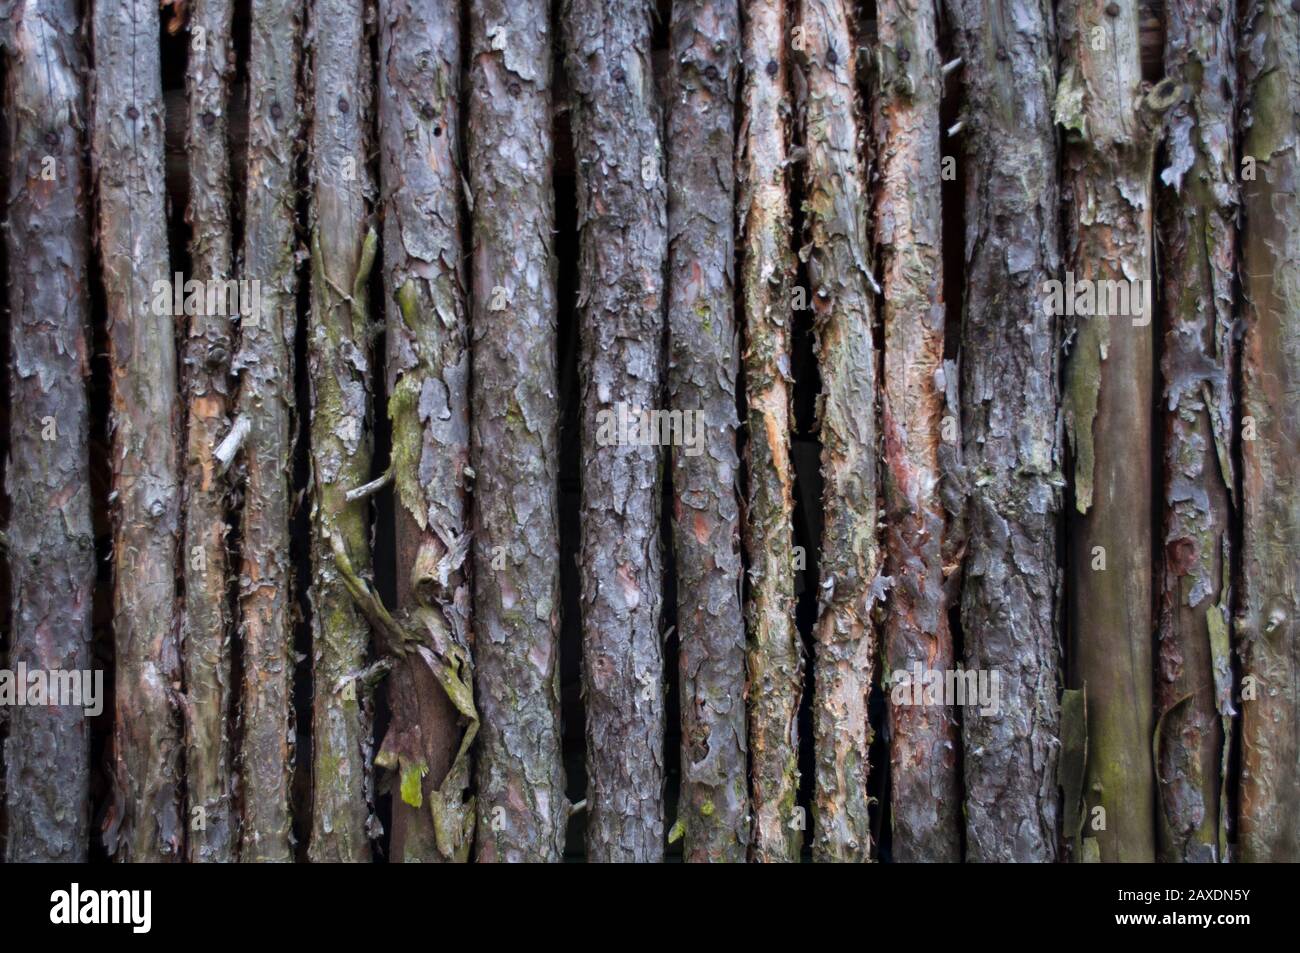 Dry sticks arranged in vertikal rows image for background use Stock Photo